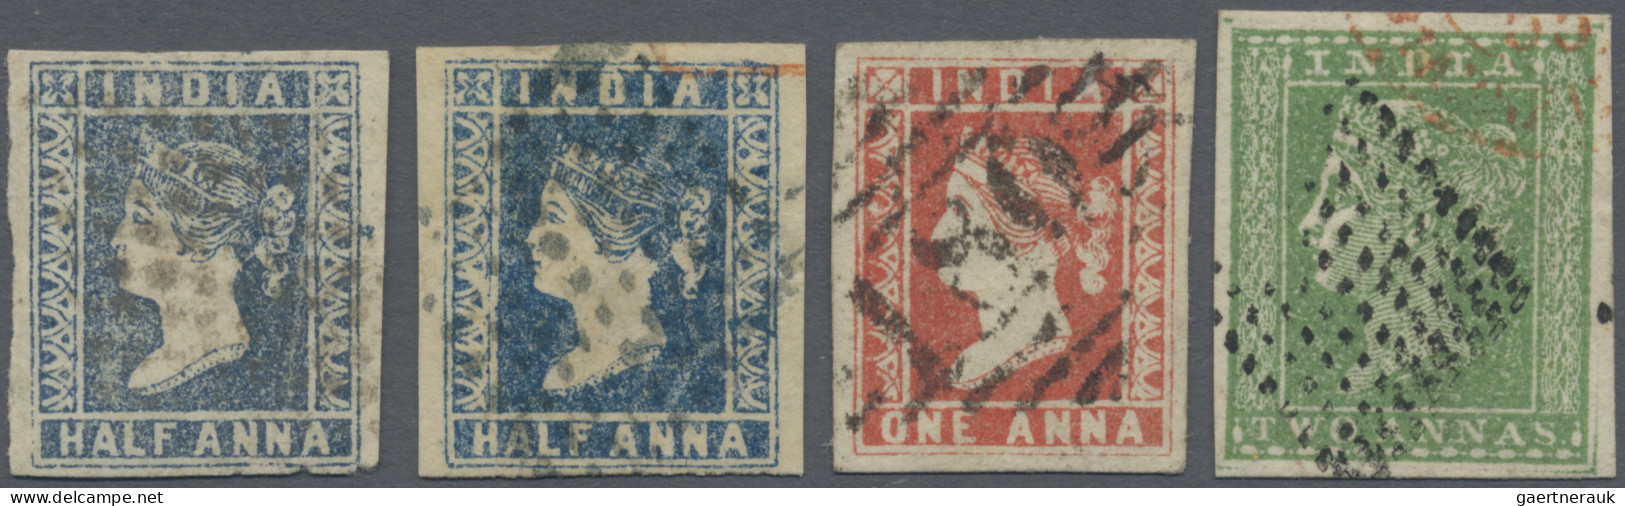 India: 1854 Lithographed ½a. Blue (two Singles) And 1a. Red Plus 2a. Green, All - 1854 East India Company Administration